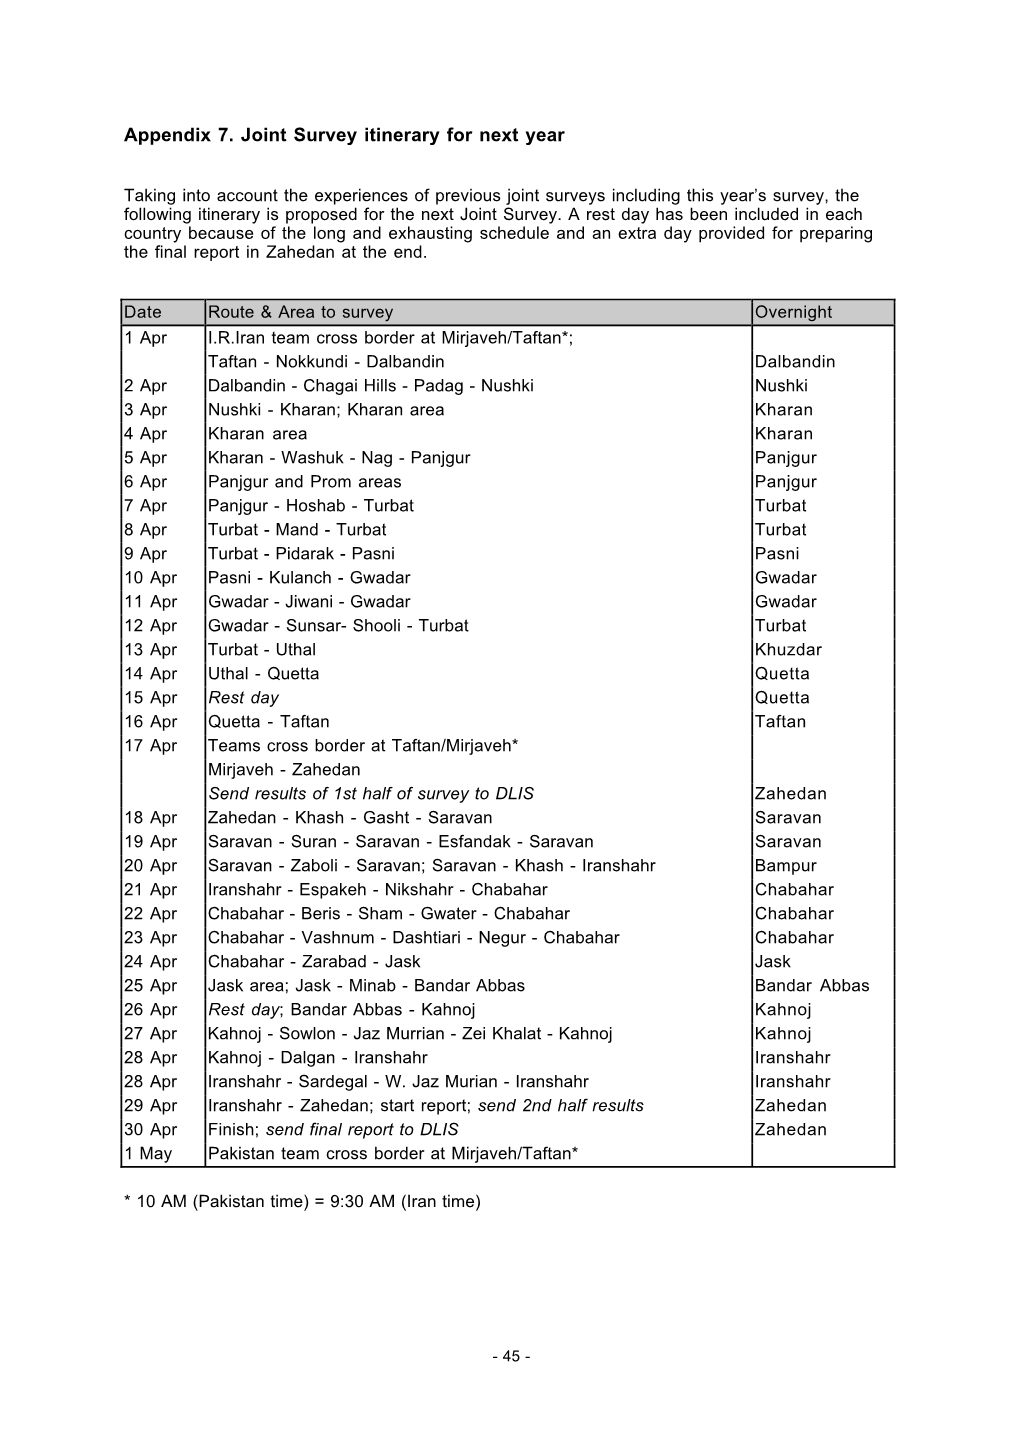 Appendix 7. Joint Survey Itinerary for Next Year